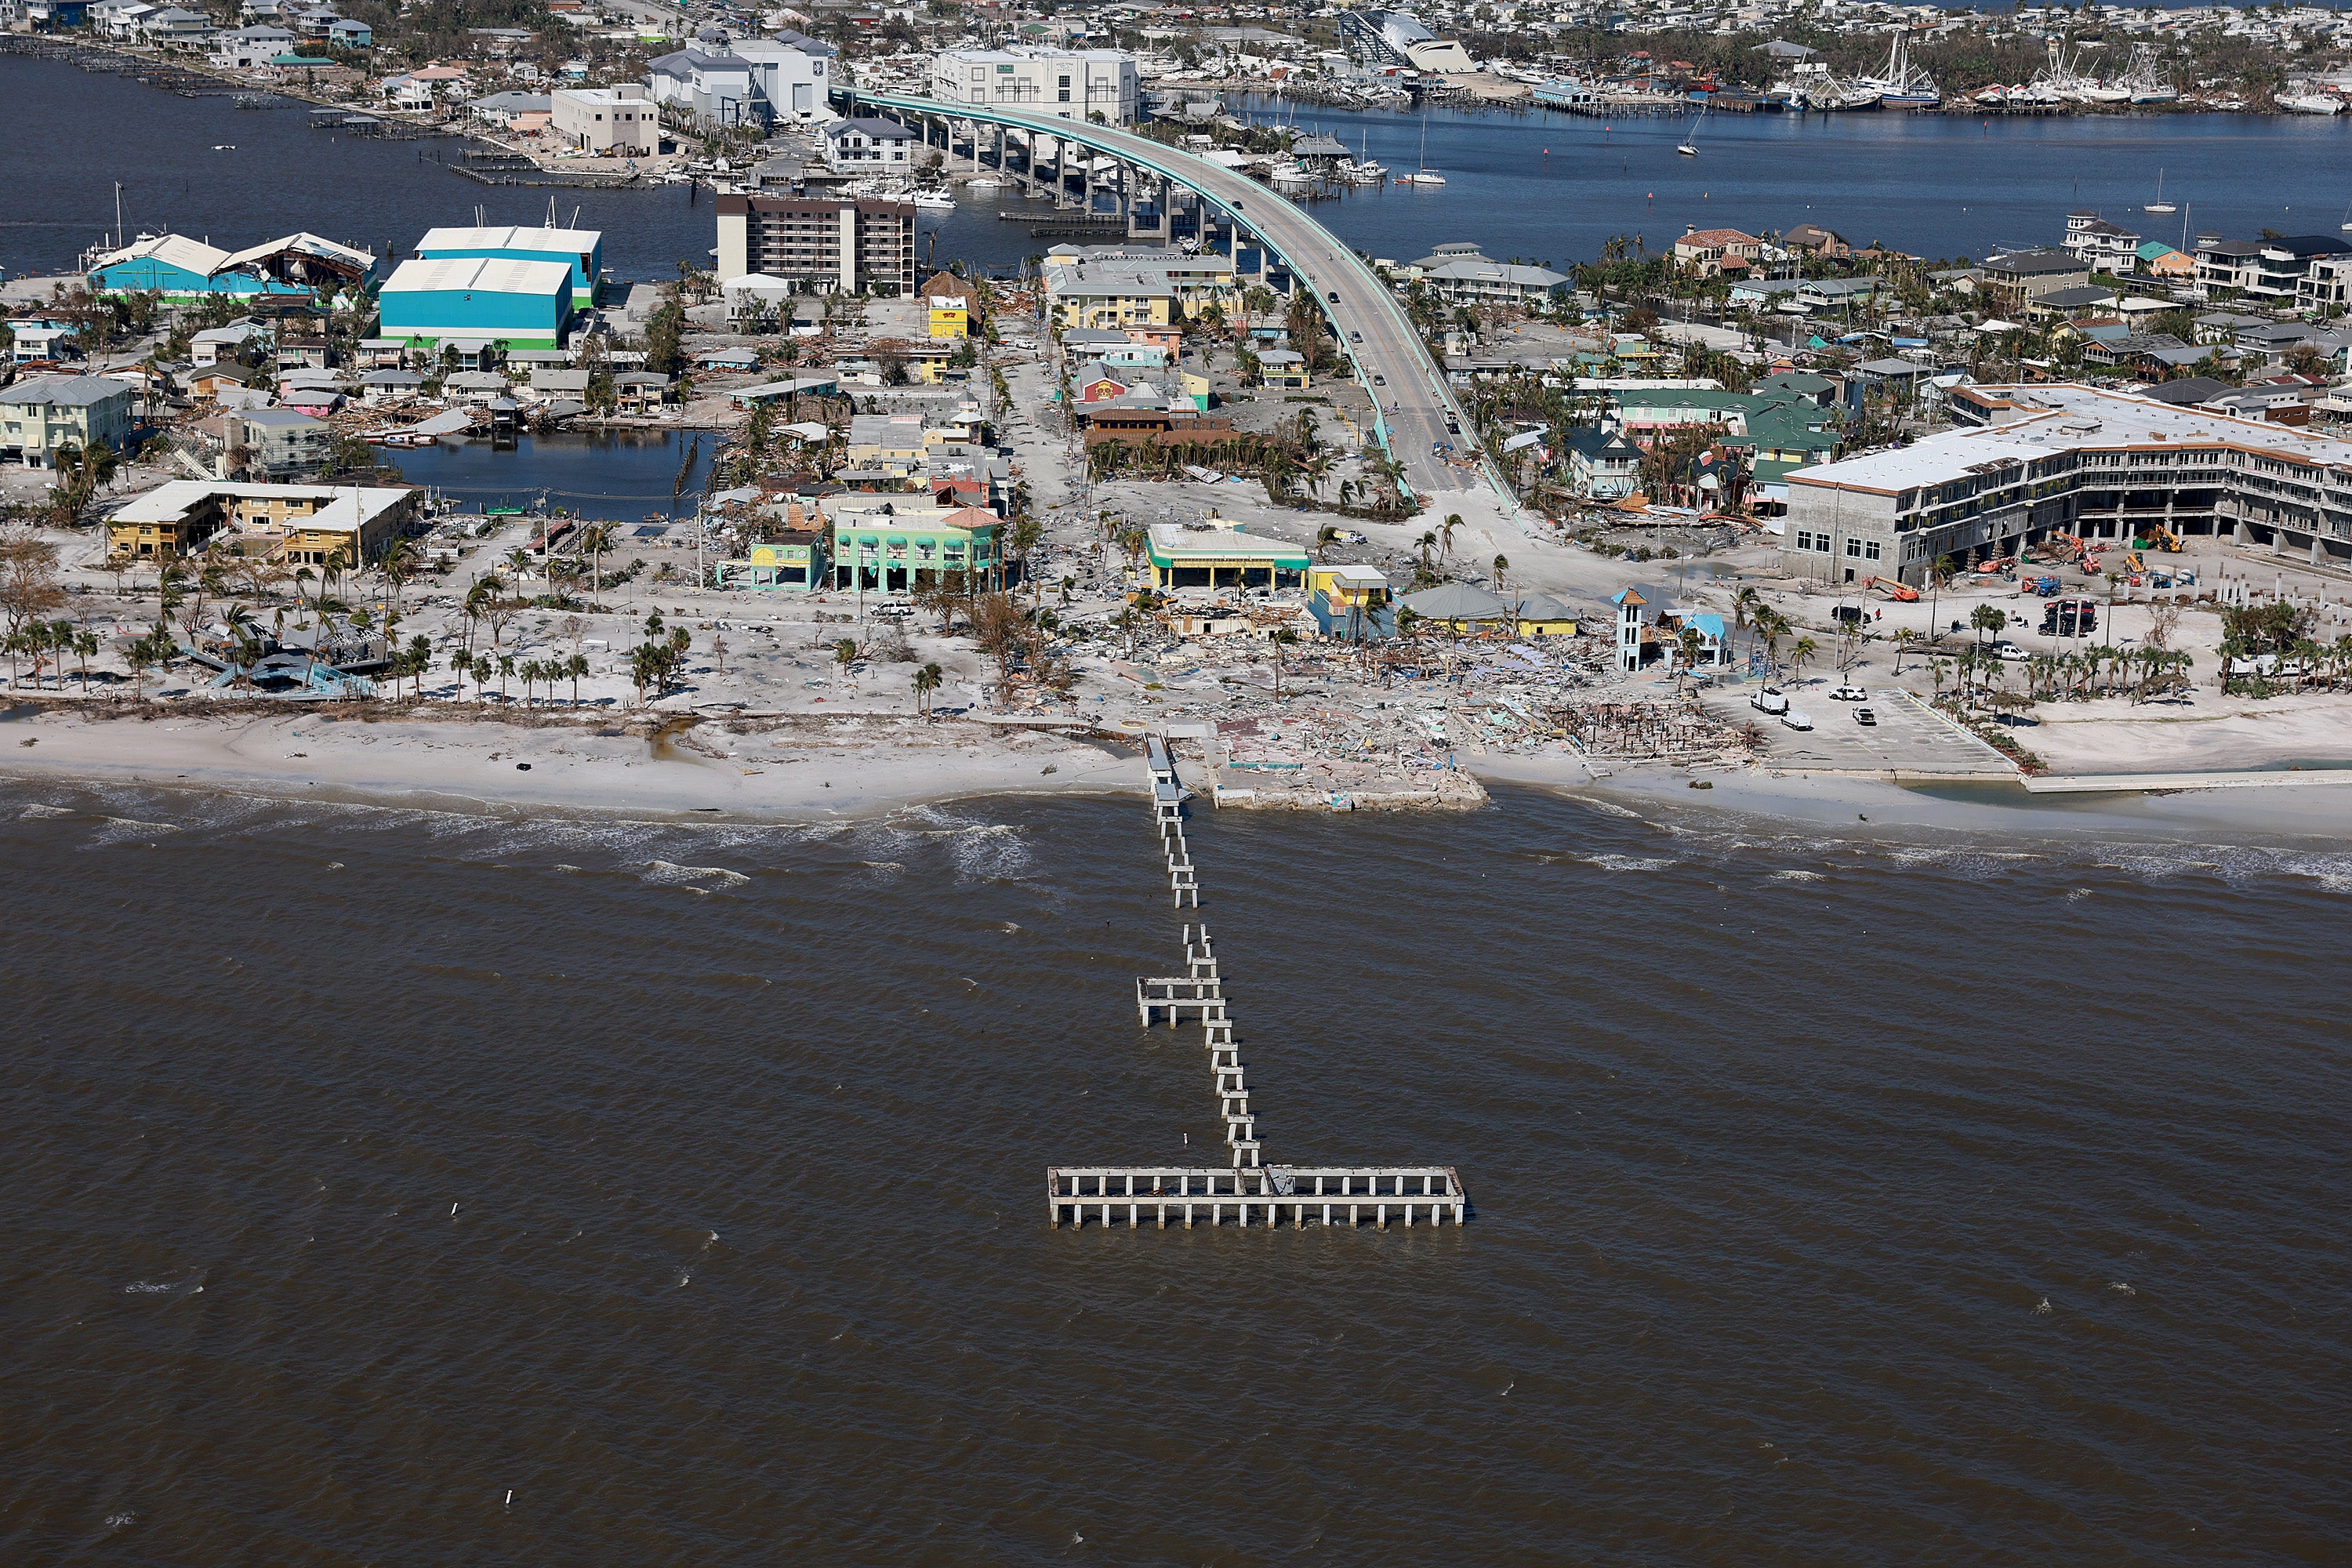 In an aerial view, a damaged Fort Myers Beach pier and surrounding buildings are seen after Hurricane Ian passed through the area on September 29, 2022 in Fort Myers Beach, Florida.